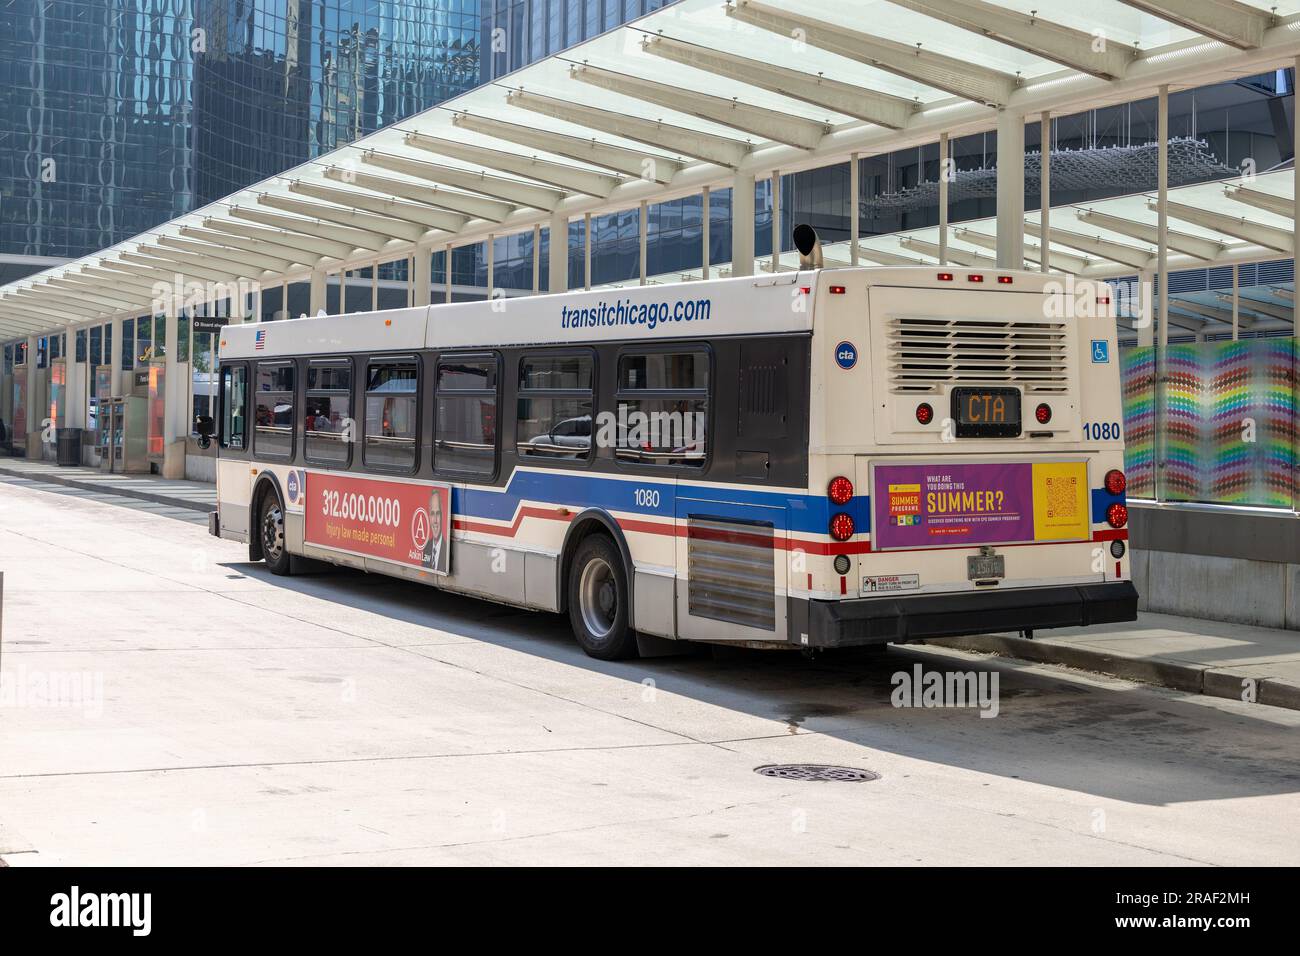 Chicago City Bus At The Union Station Transit Center Downtown Chicago ...